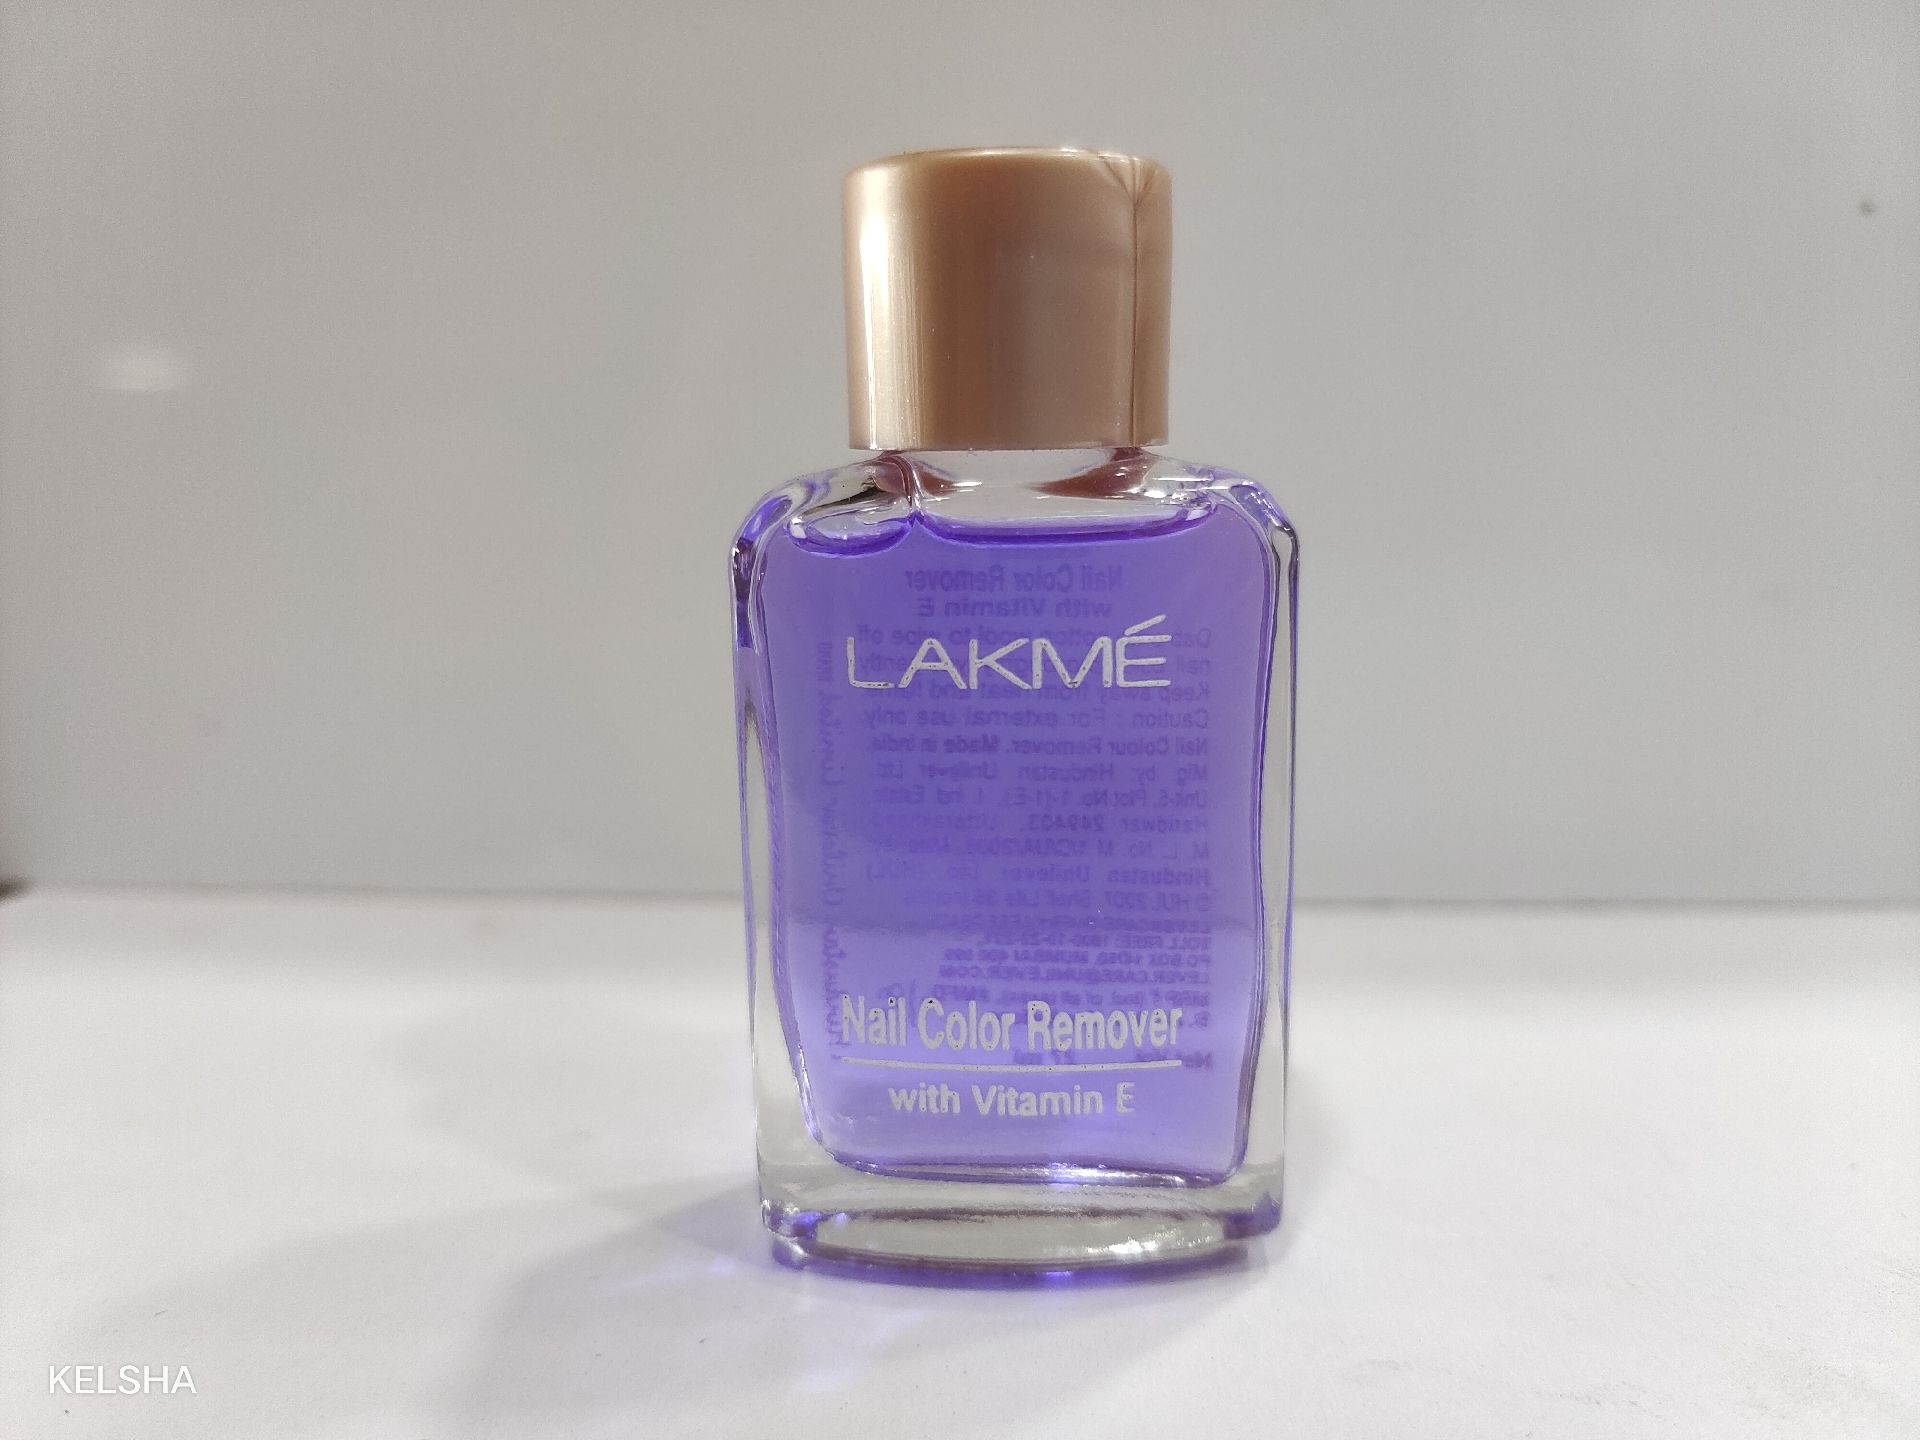 Maybelline Keep Up The Flame + Lakme Nail Color Remover Reviews - The  Pretty City Girl | Indian Travel & Lifestyle Blog